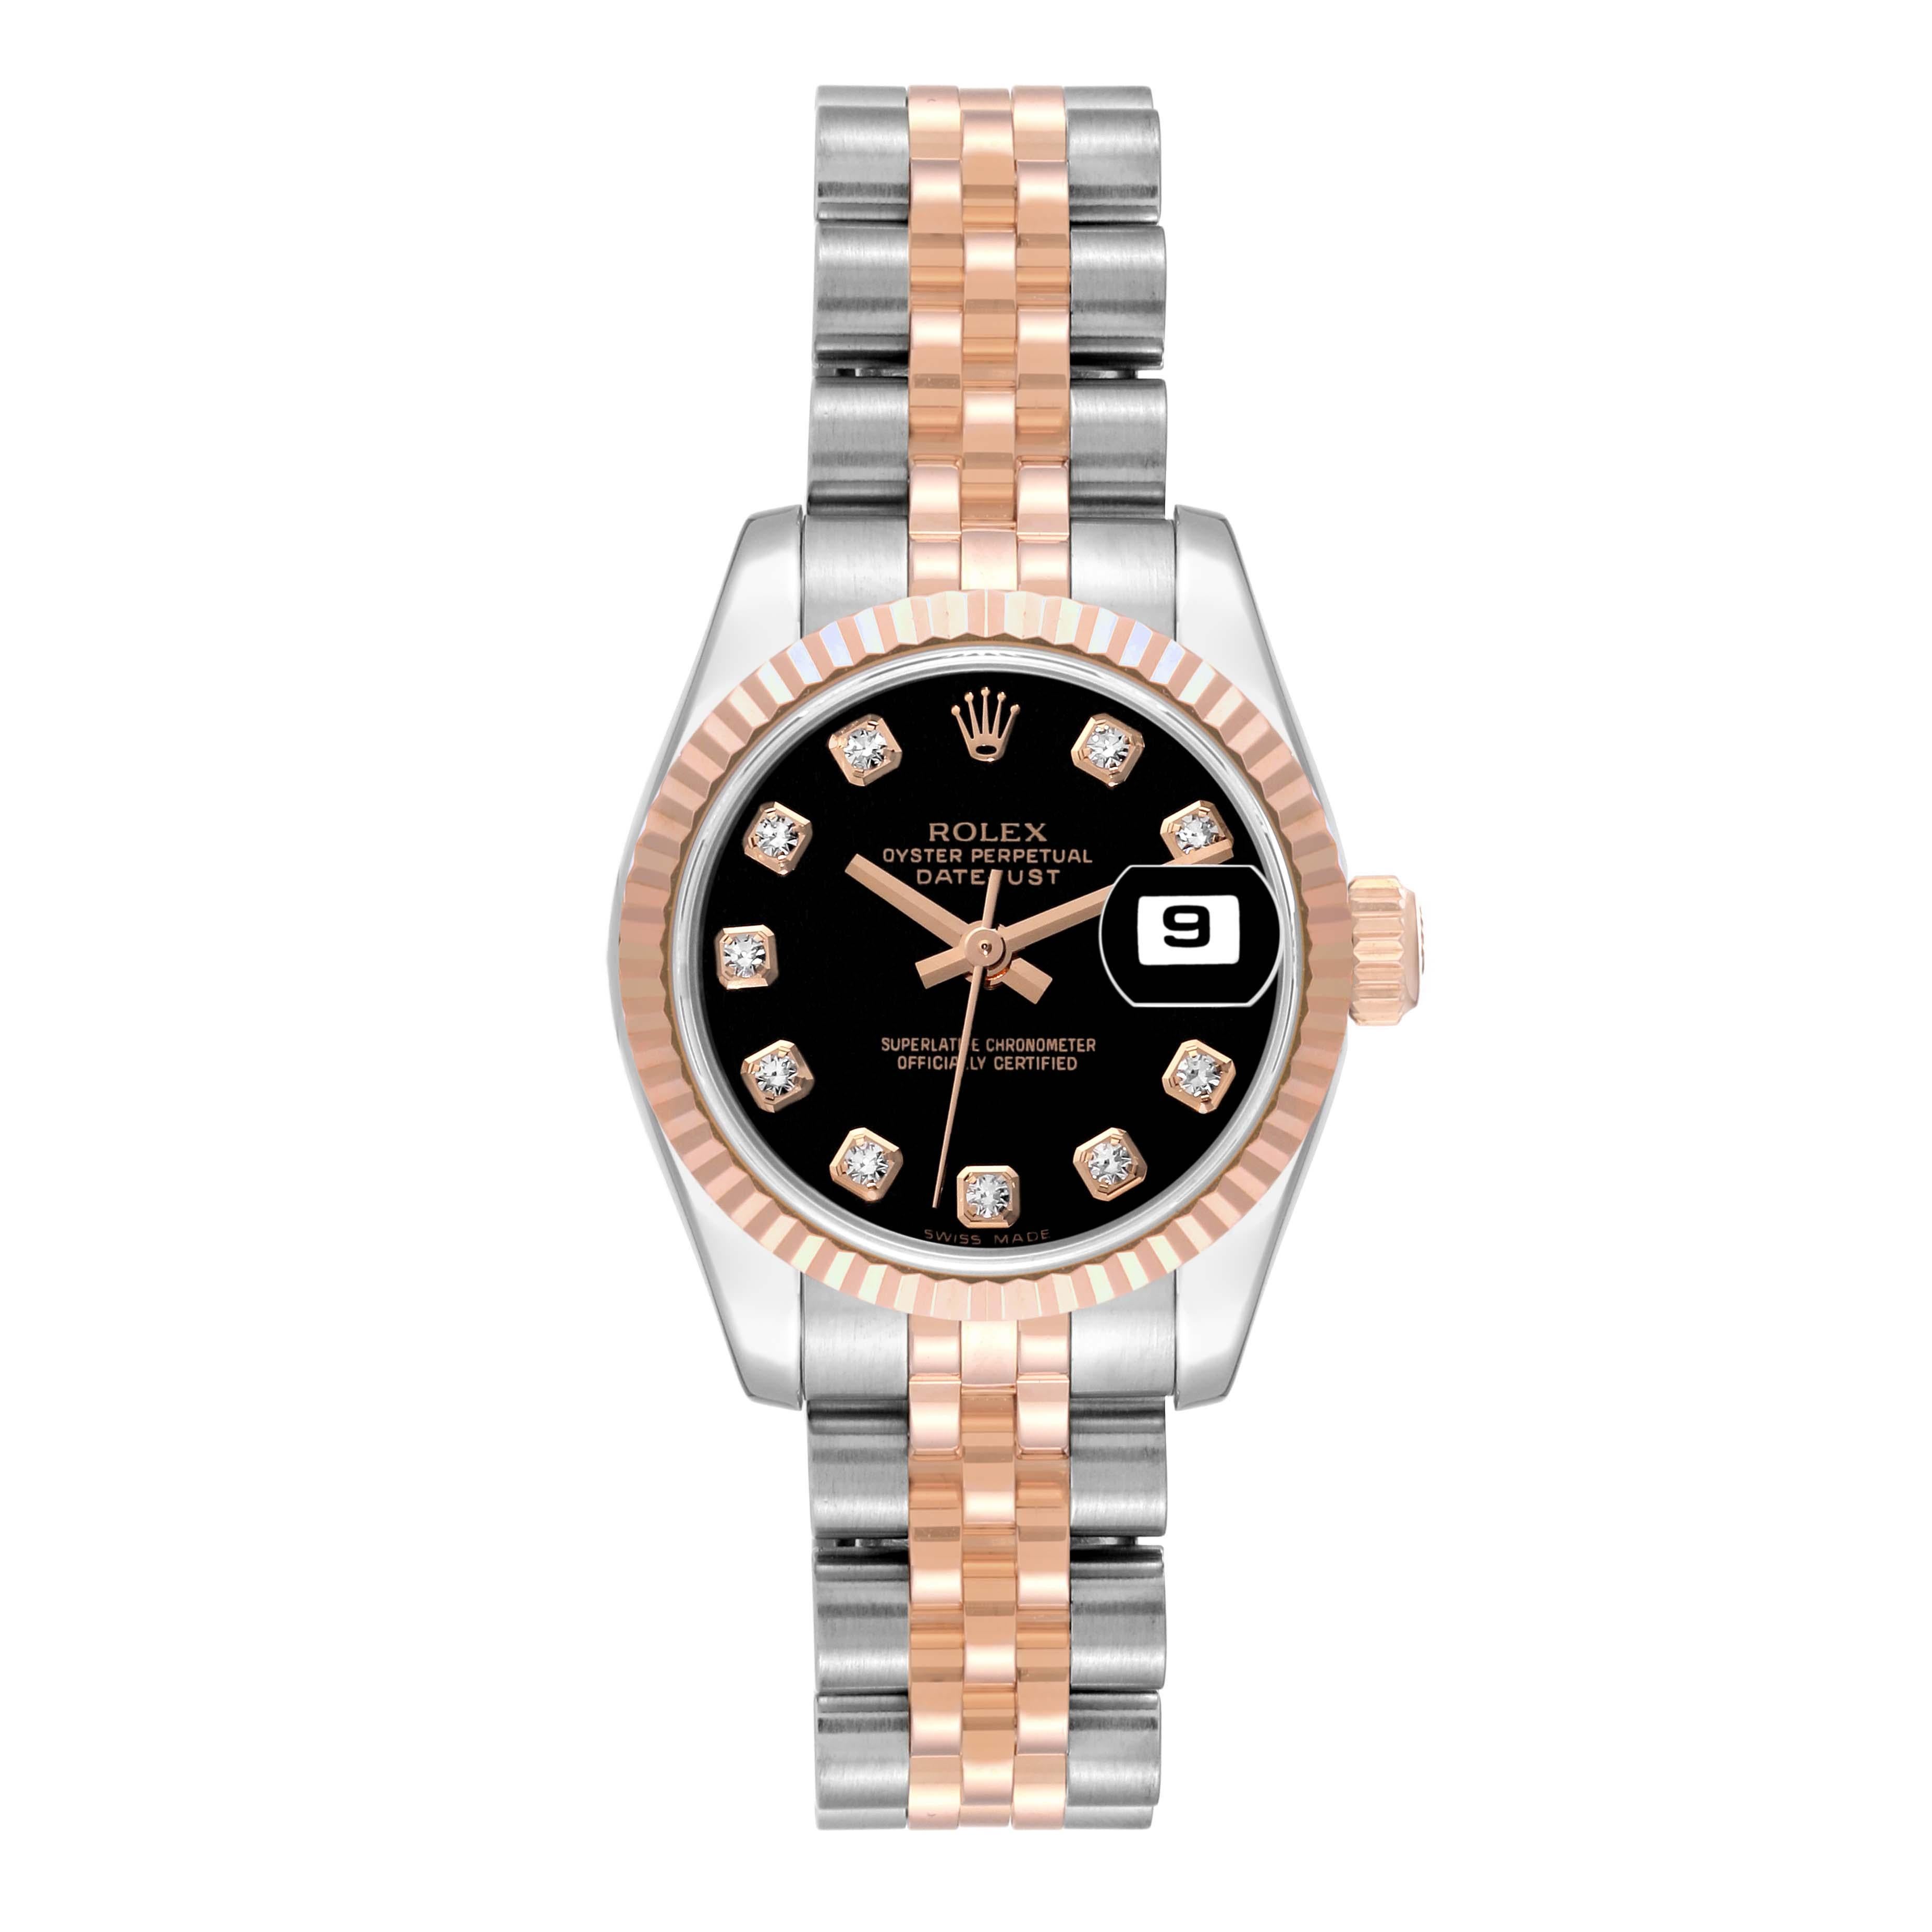 Rolex Datejust Steel Rose Gold Black Diamond Dial Ladies Watch 179171 In Excellent Condition For Sale In Atlanta, GA